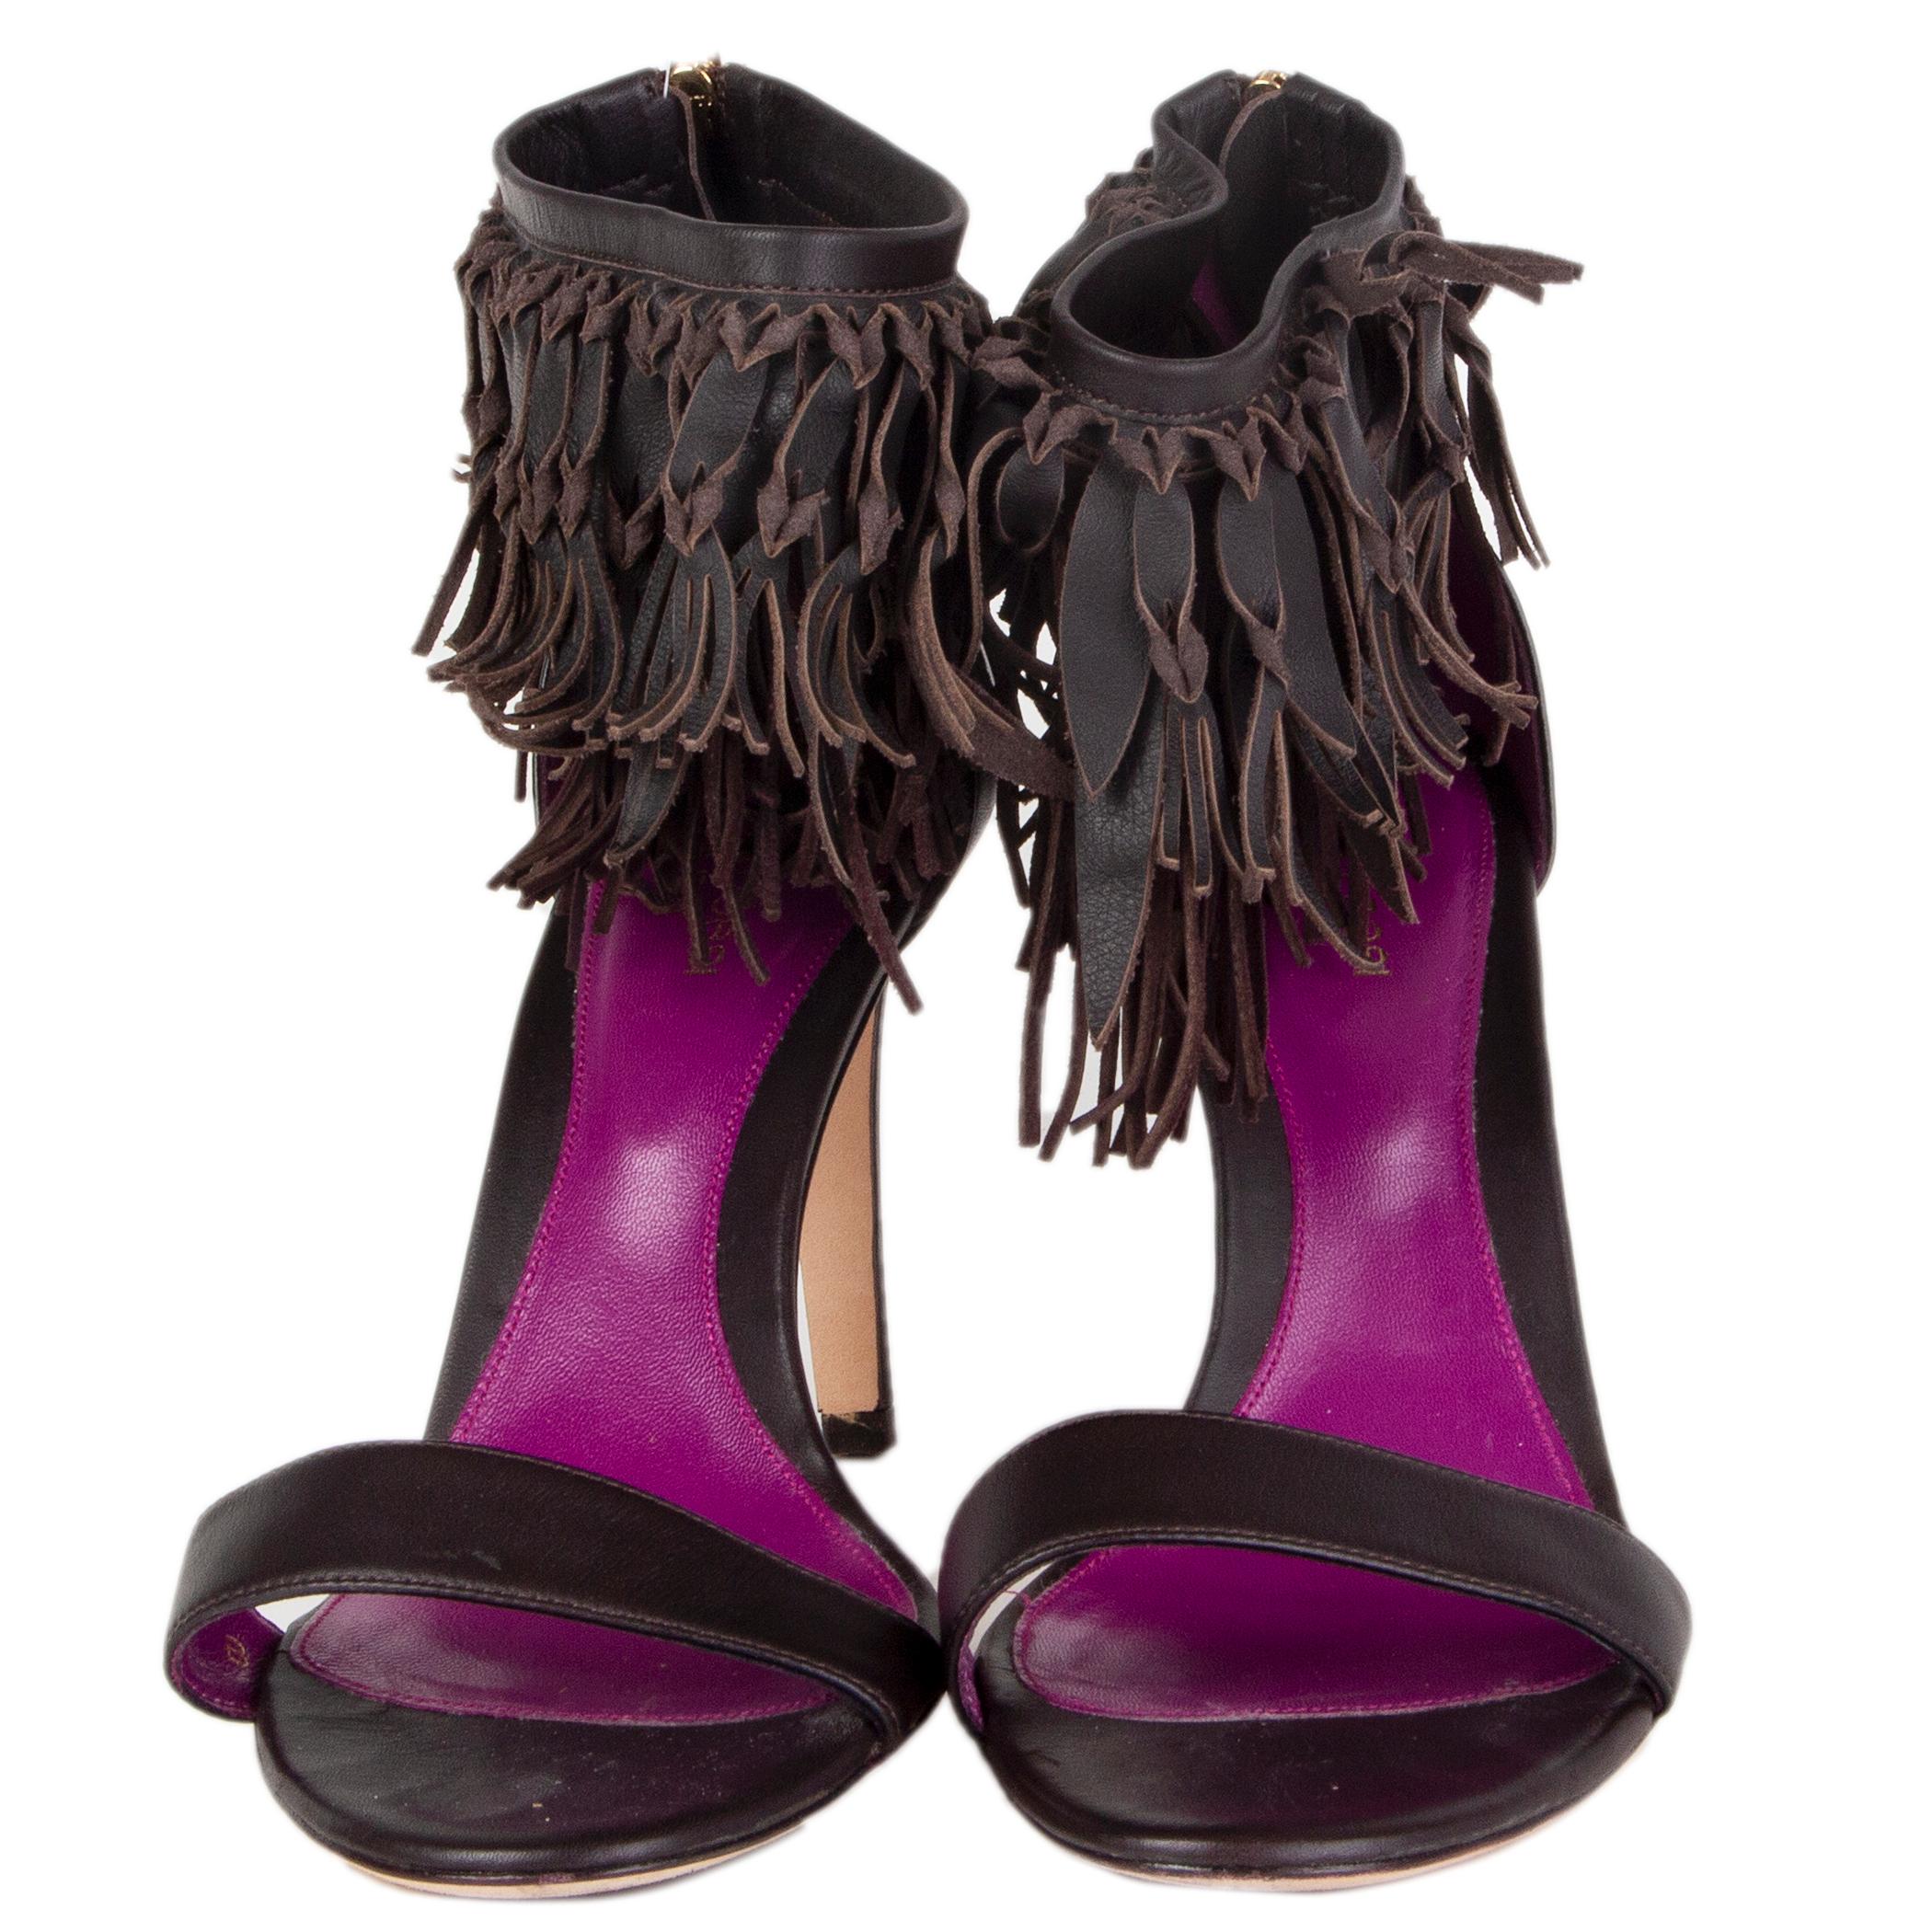 100% authentic Sergio Rossi fringe ankle-strap sandals in dark brown leather. Open with a zipper at the heel. Have been worn once and are in excellent conditon. 

Measurements
Imprinted Size	38
Shoe Size	38
Inside Sole	24.5cm (9.6in)
Width	8cm